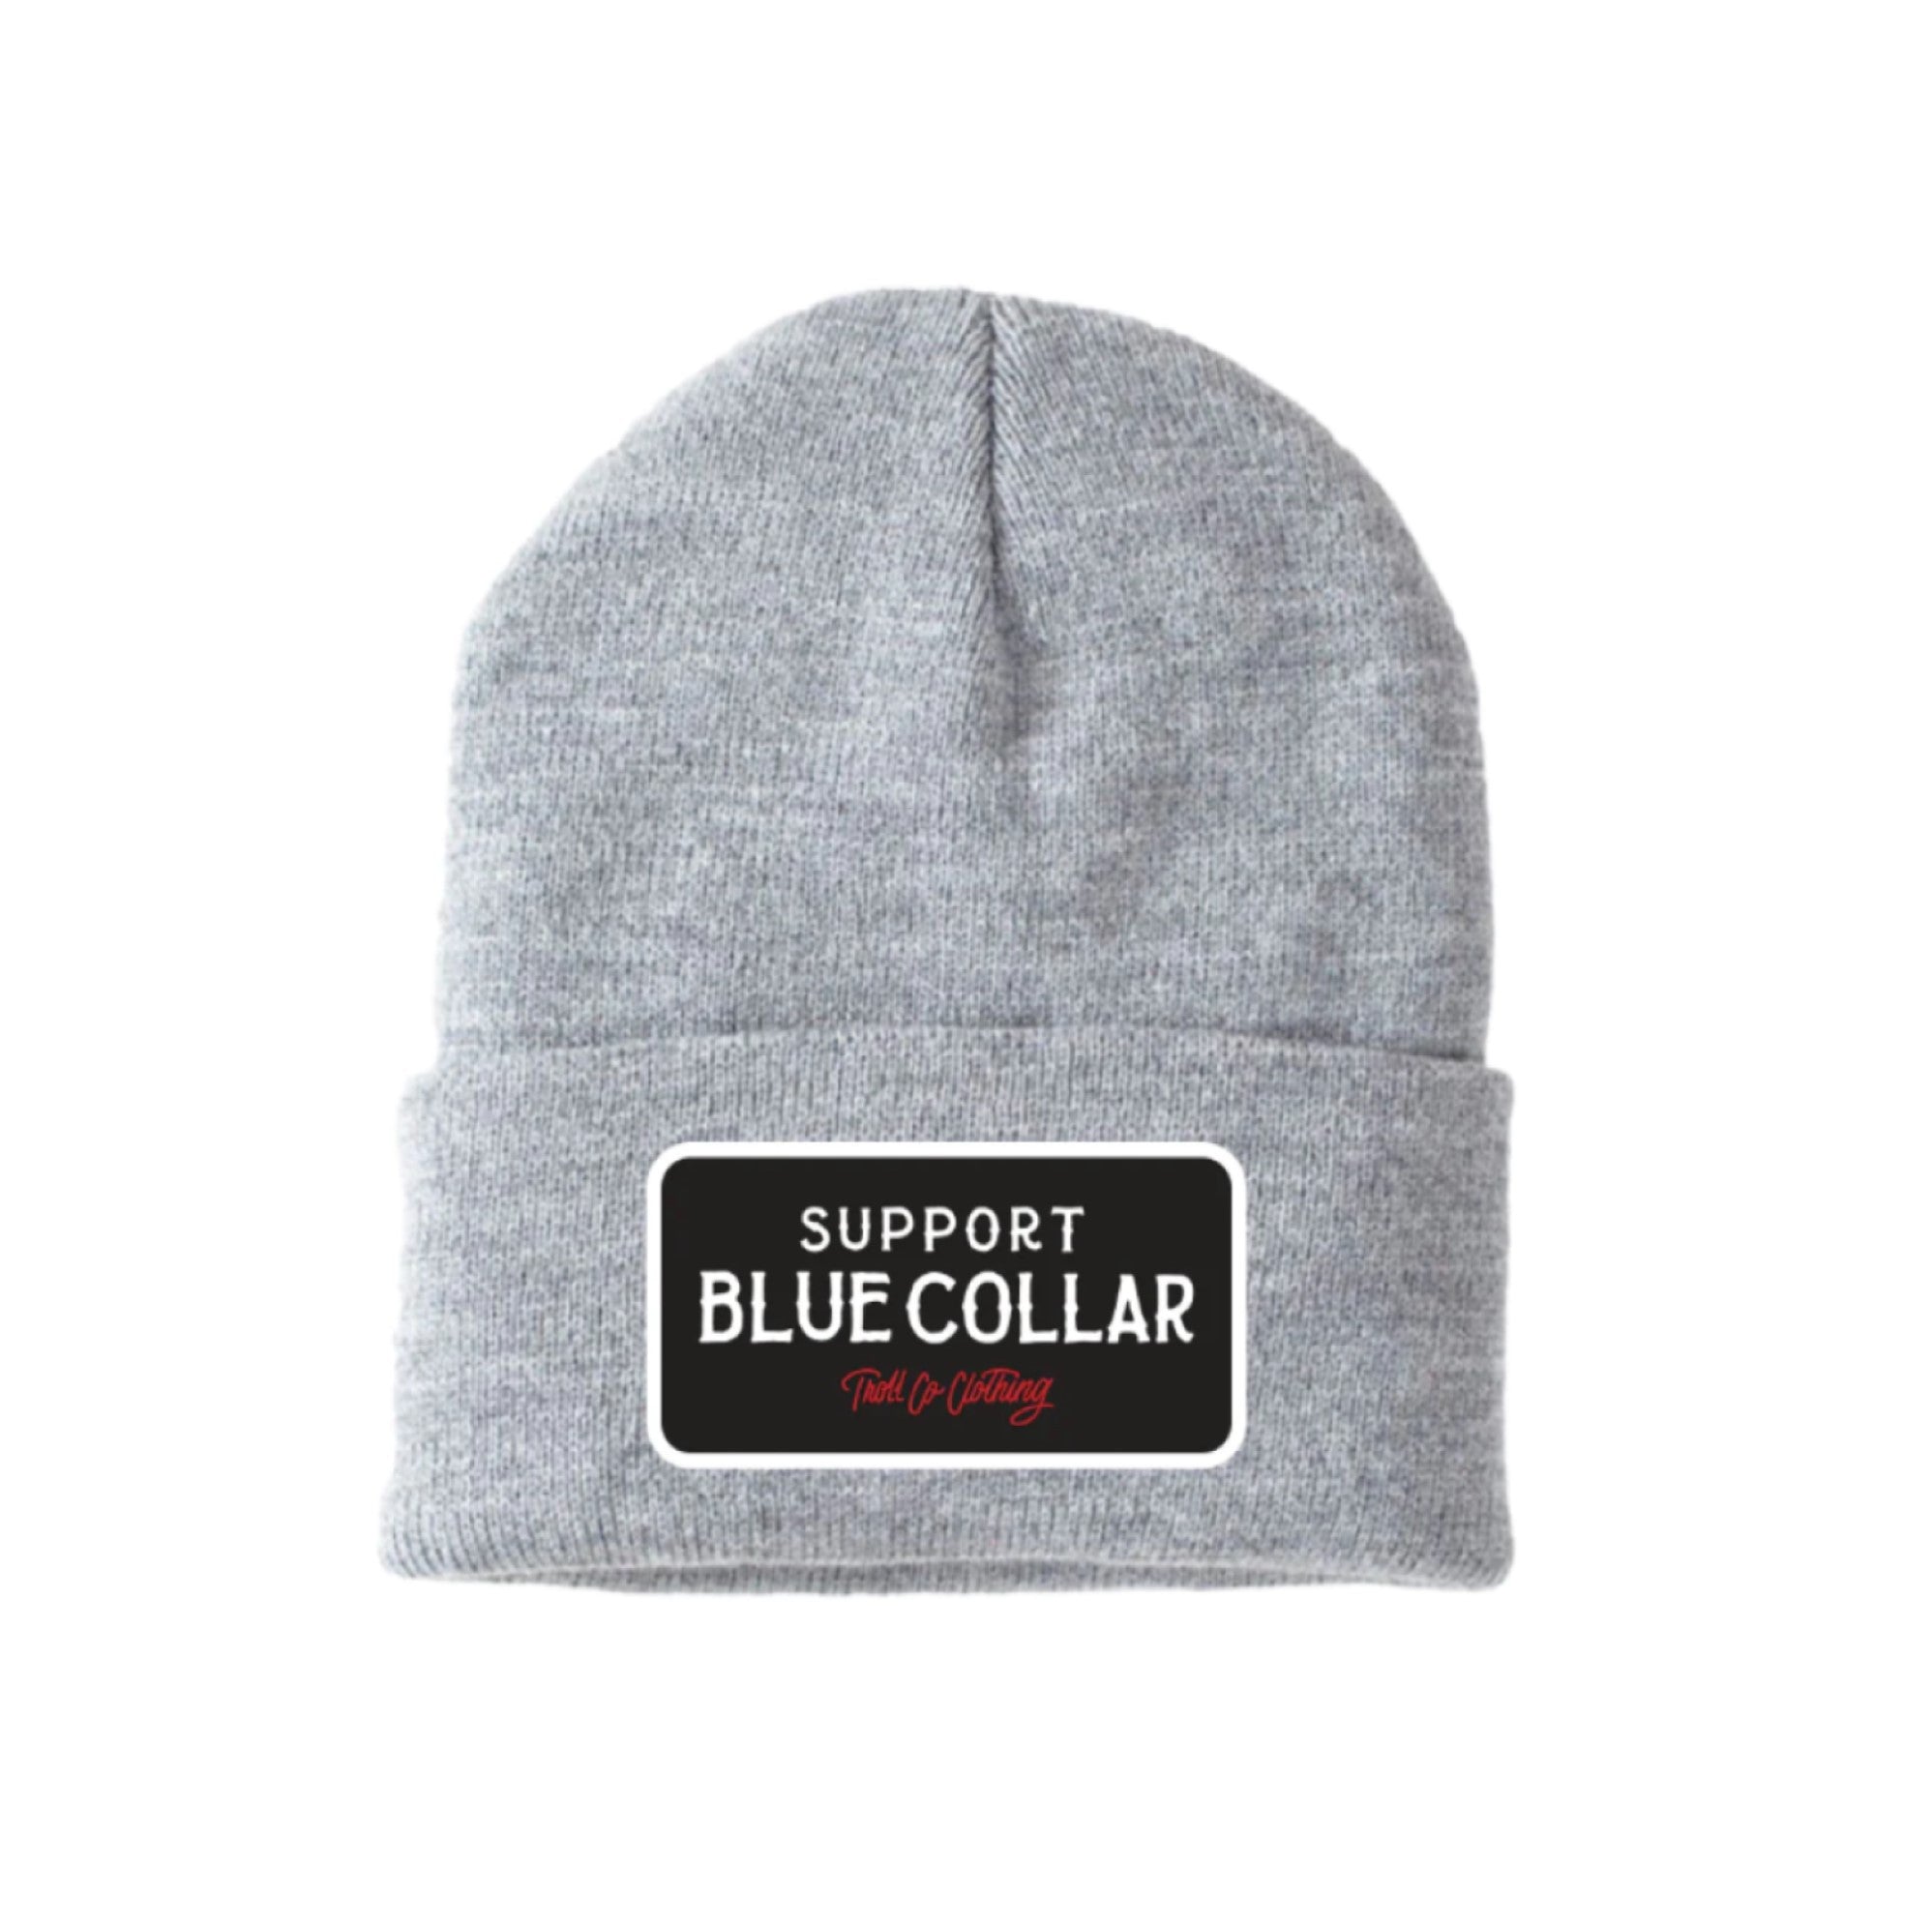 Troll Co. "Support Blue Collar" Patch Knit Beanie - Work World - Workwear, Work Boots, Safety Gear